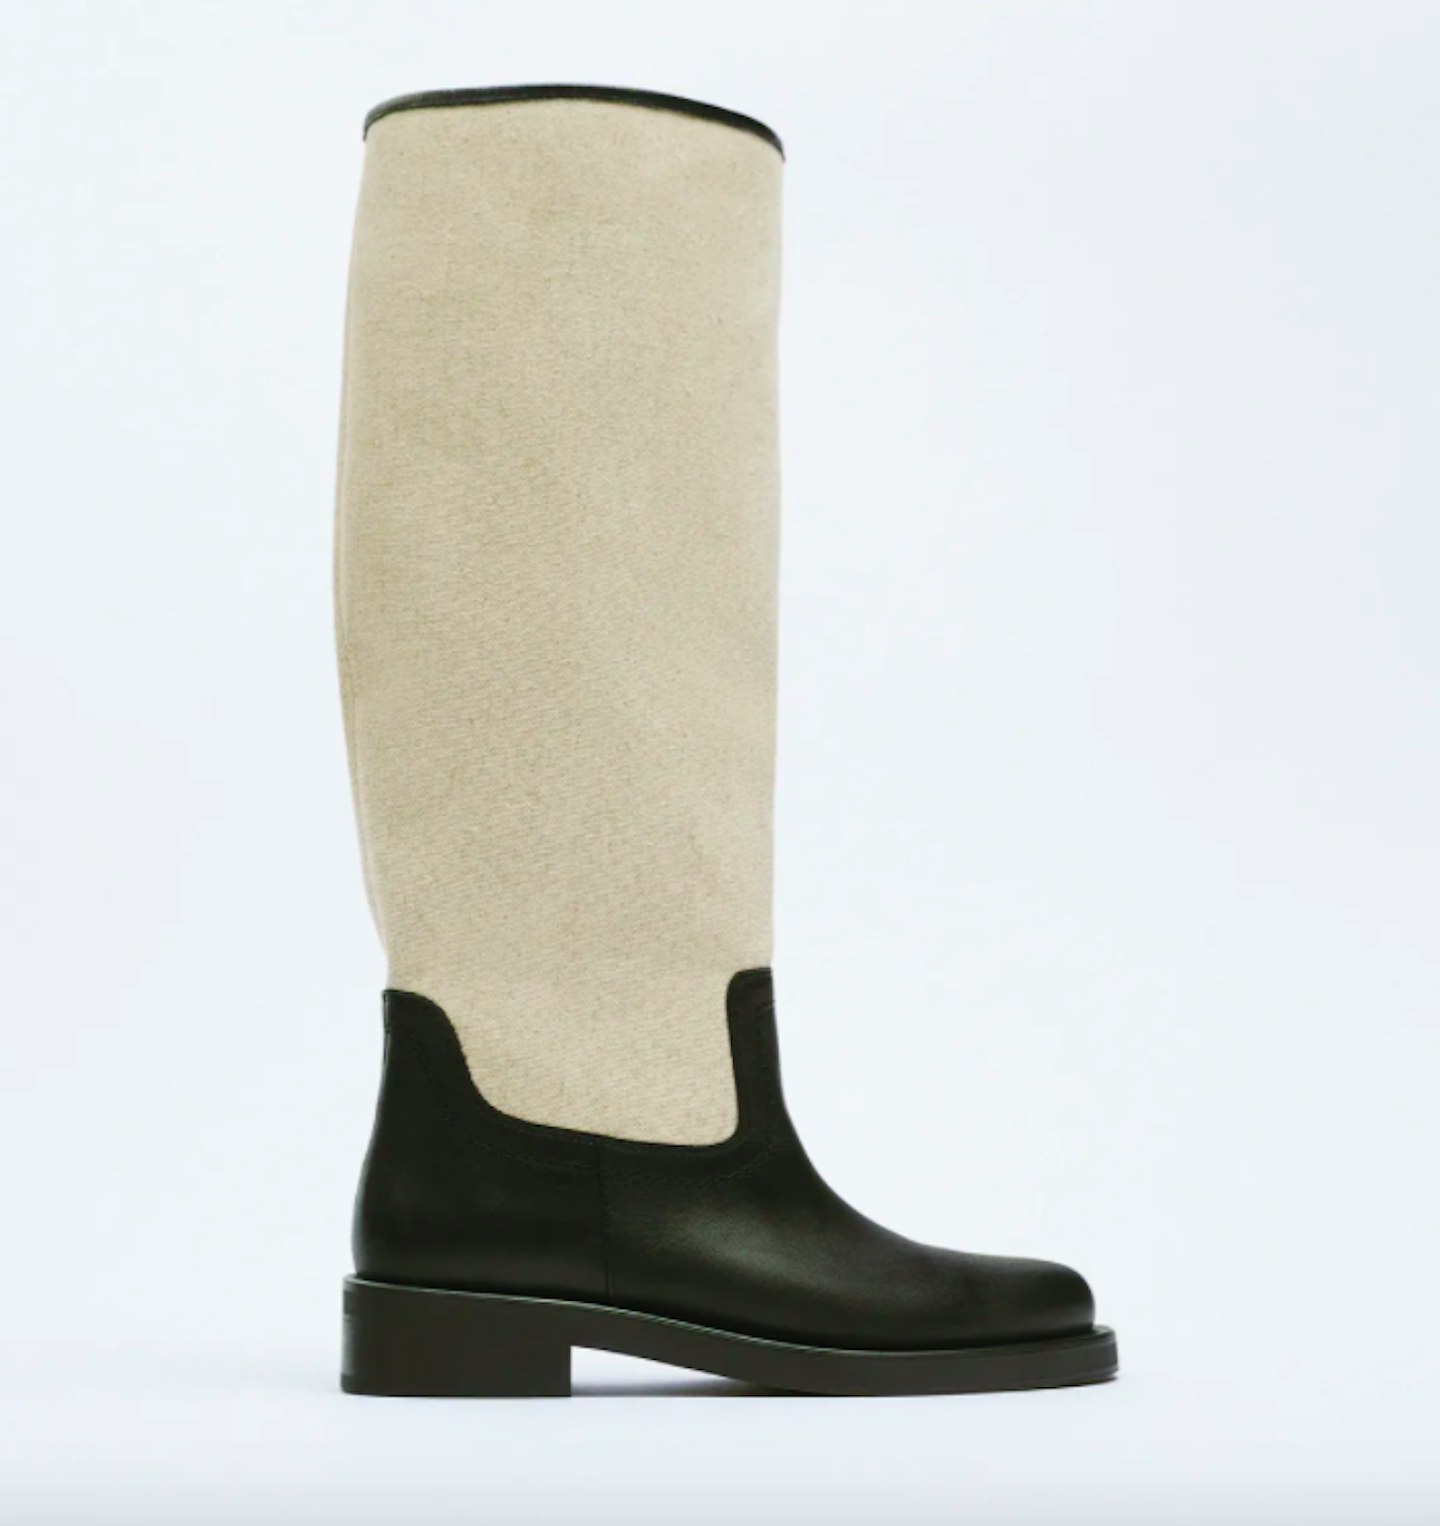 Zara, Combined Leather Boots, £109